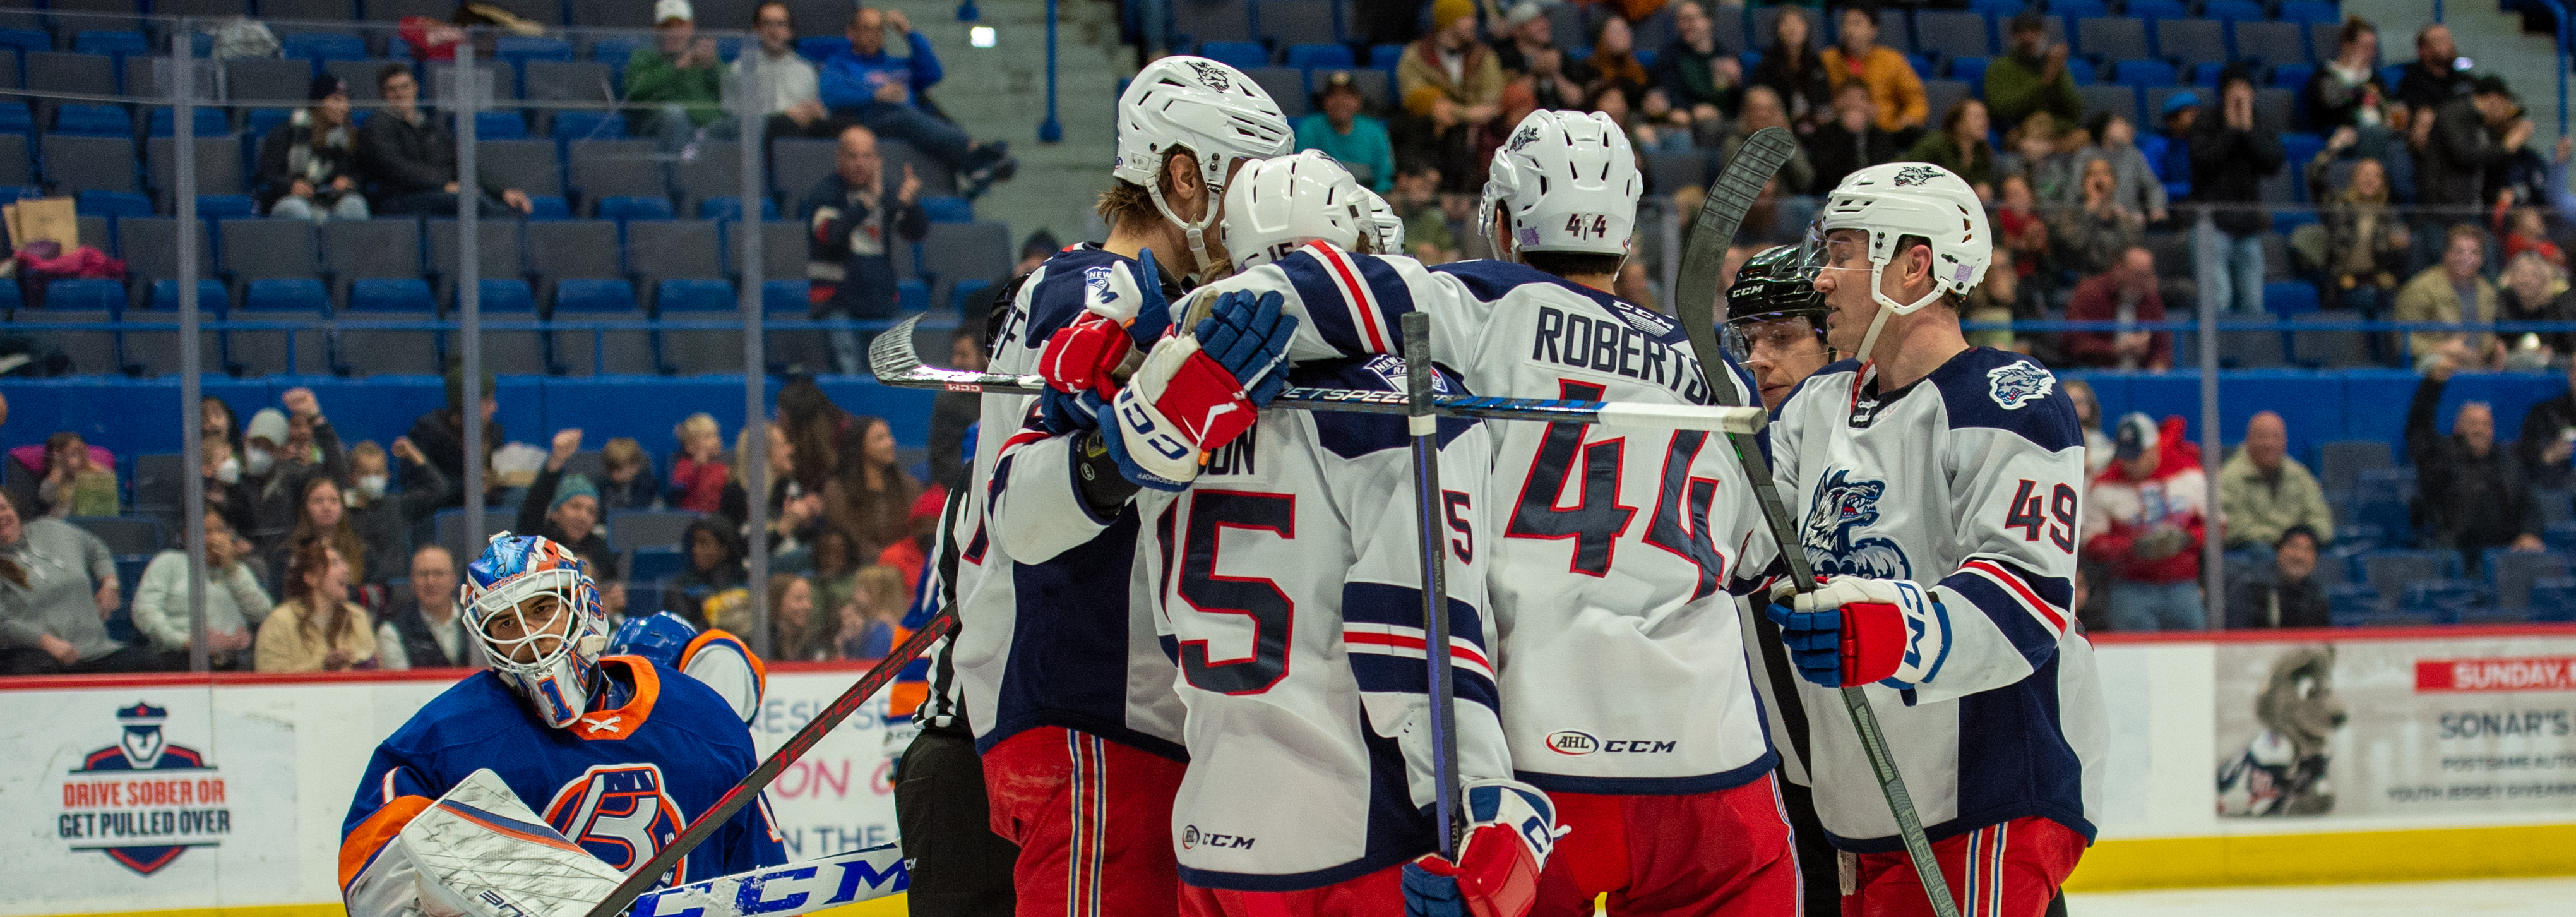 RYAN CARPENTER’S TWO GOALS PUSH WOLF PACK PAST ISLANDERS 4-3 AT XL CENTER